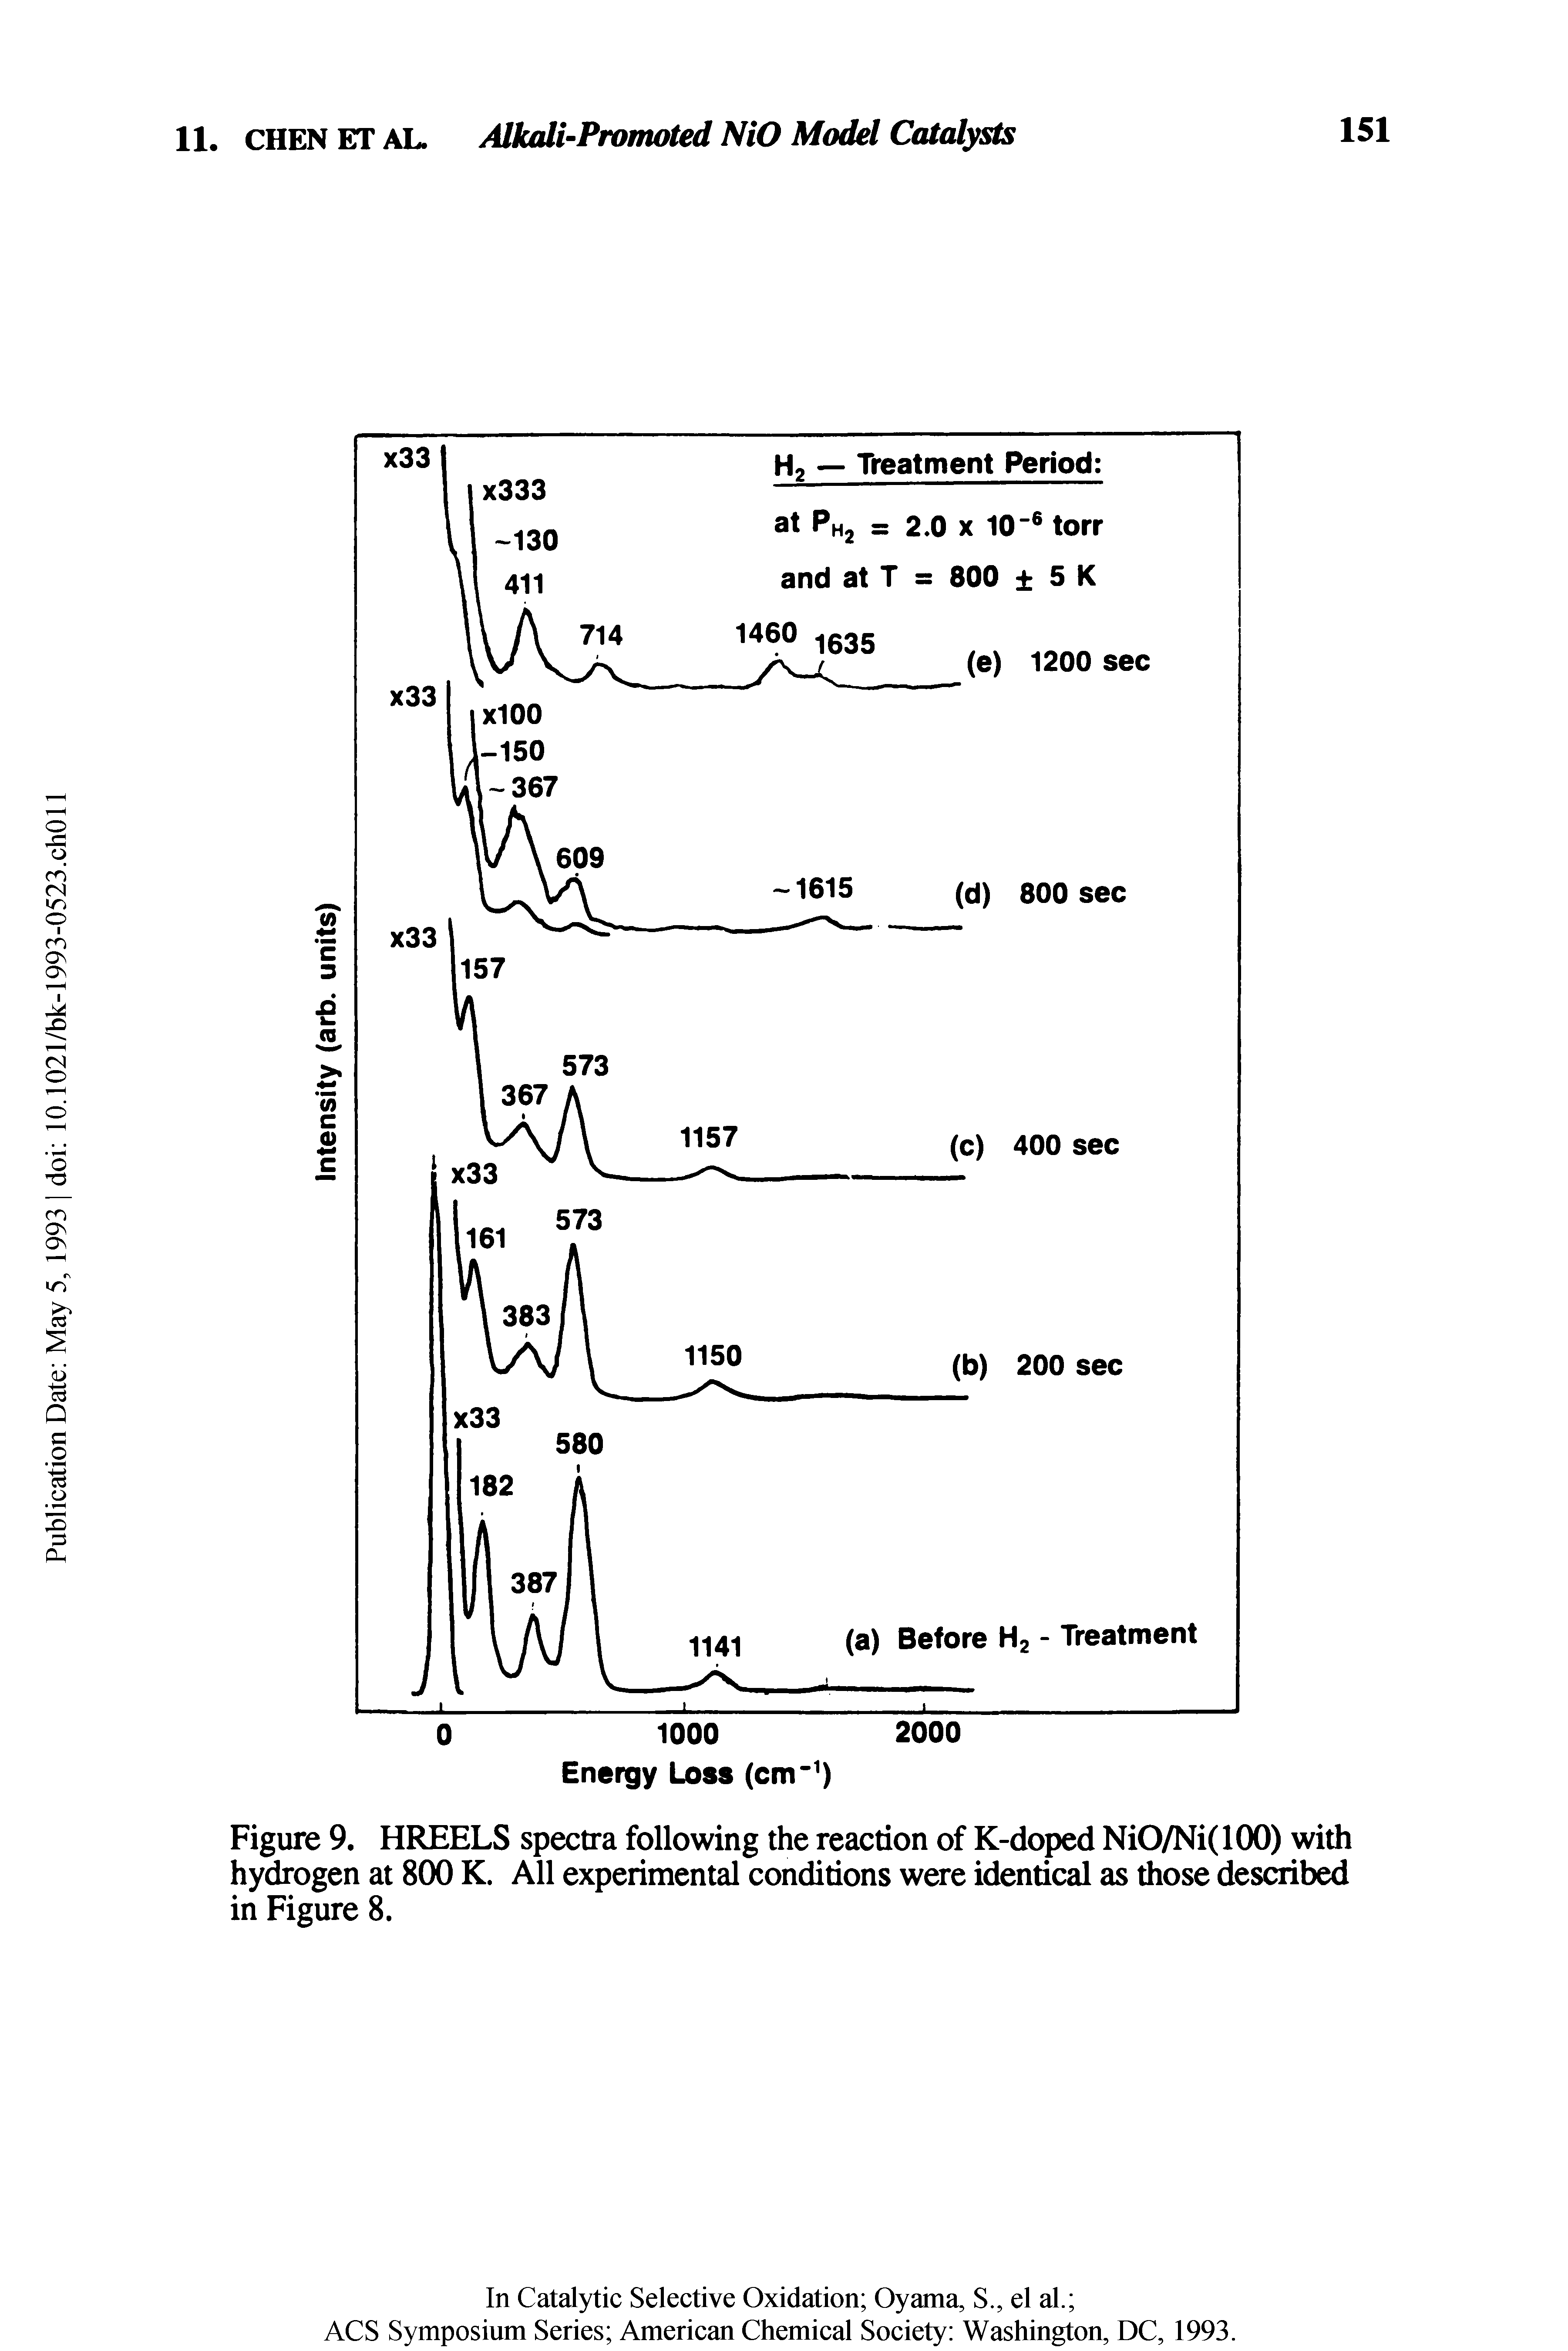 Figure 9. HREELS spectra following the reaction of K-doped Ni0/Ni(100) with hydrogen at 800 K. All experimental conditions were identical as those described in Figure 8.